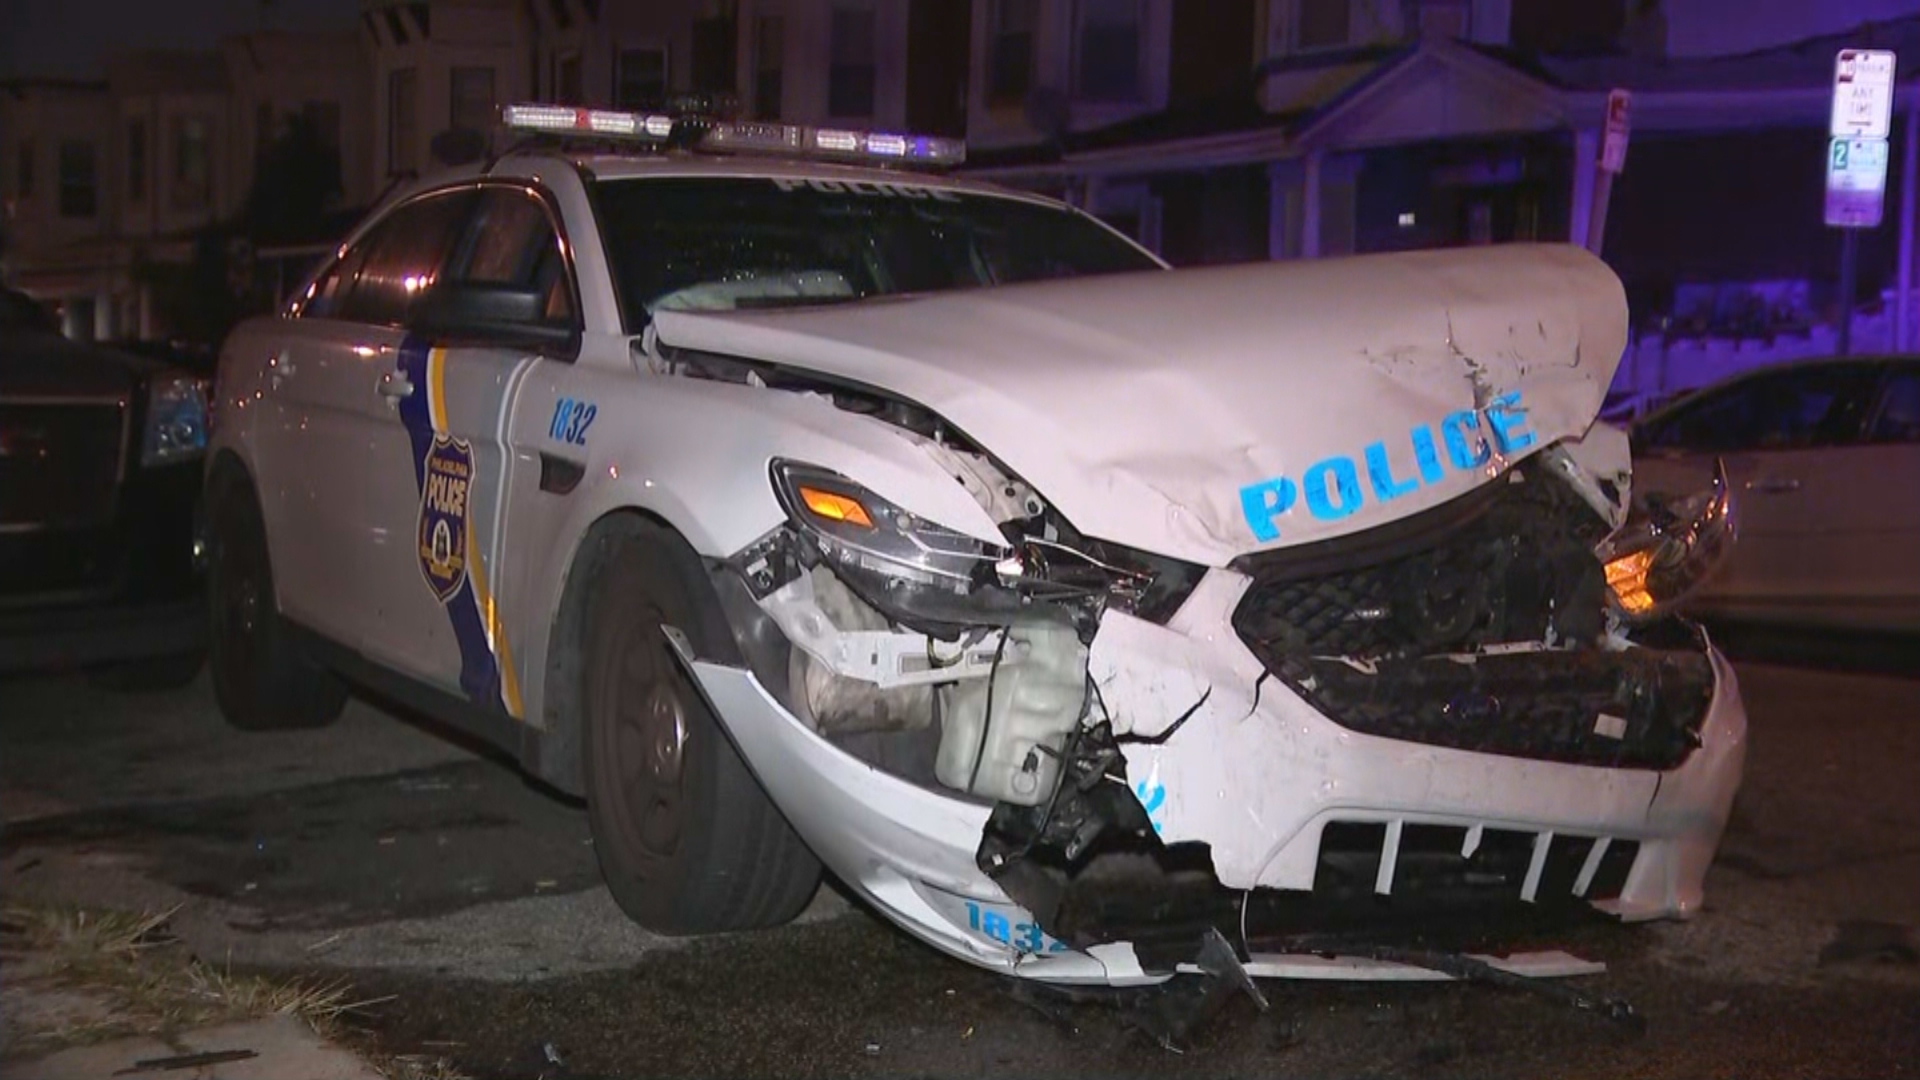 Driver In Custody After Crash That Injured 2 Philadelphia Police Officers